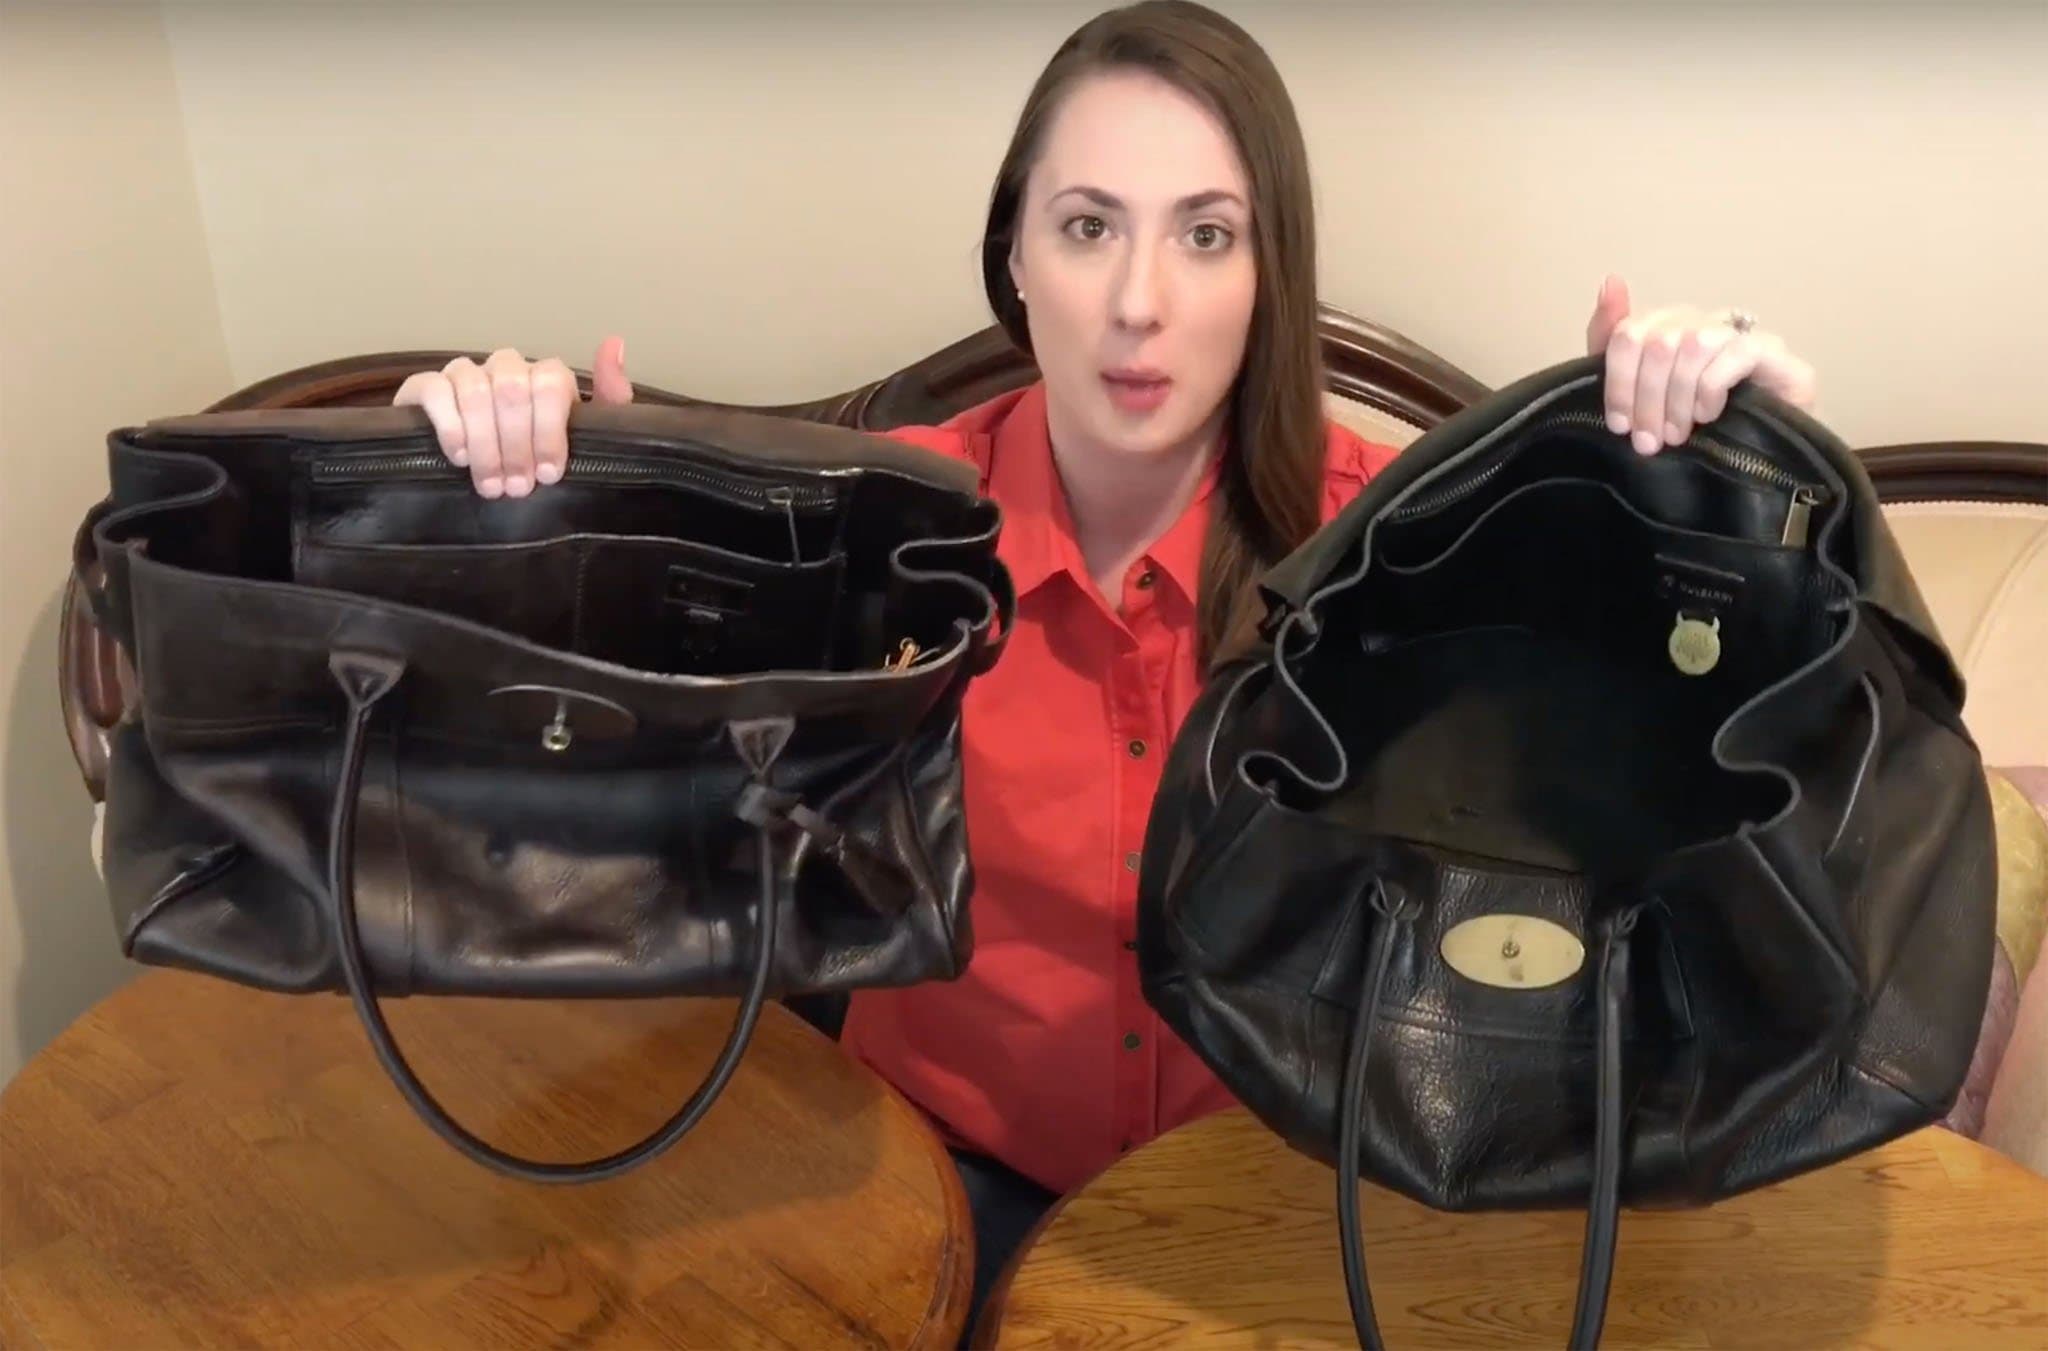 A screenshot from YouTuber Chicprofessor comparing a real Mulberry Bayswater bag (left) from a fake one (right)